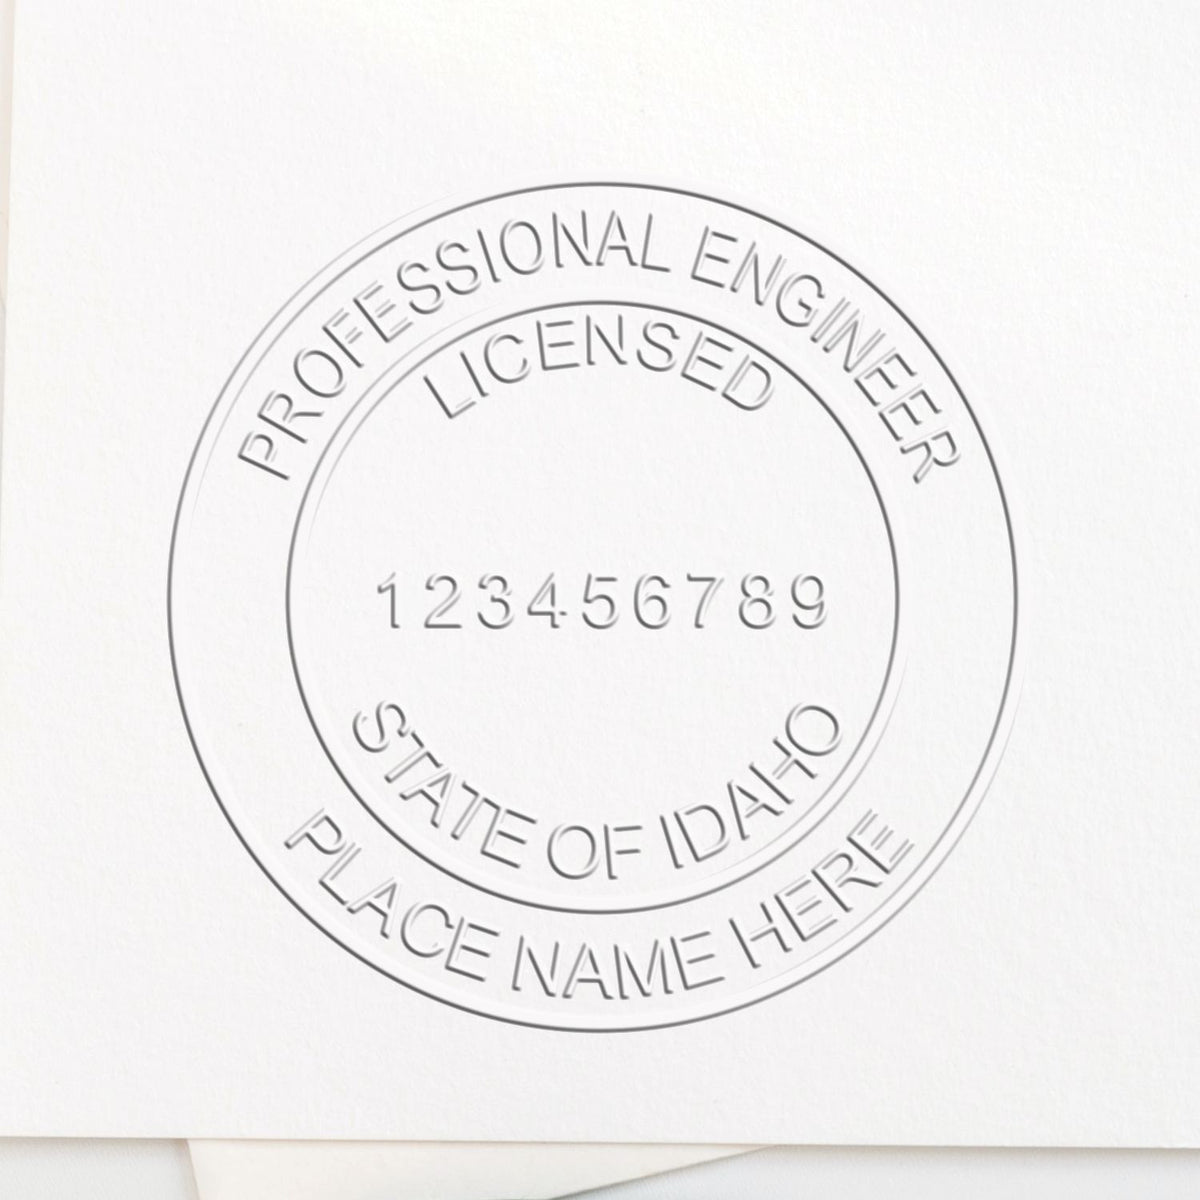 A photograph of the Hybrid Idaho Engineer Seal stamp impression reveals a vivid, professional image of the on paper.